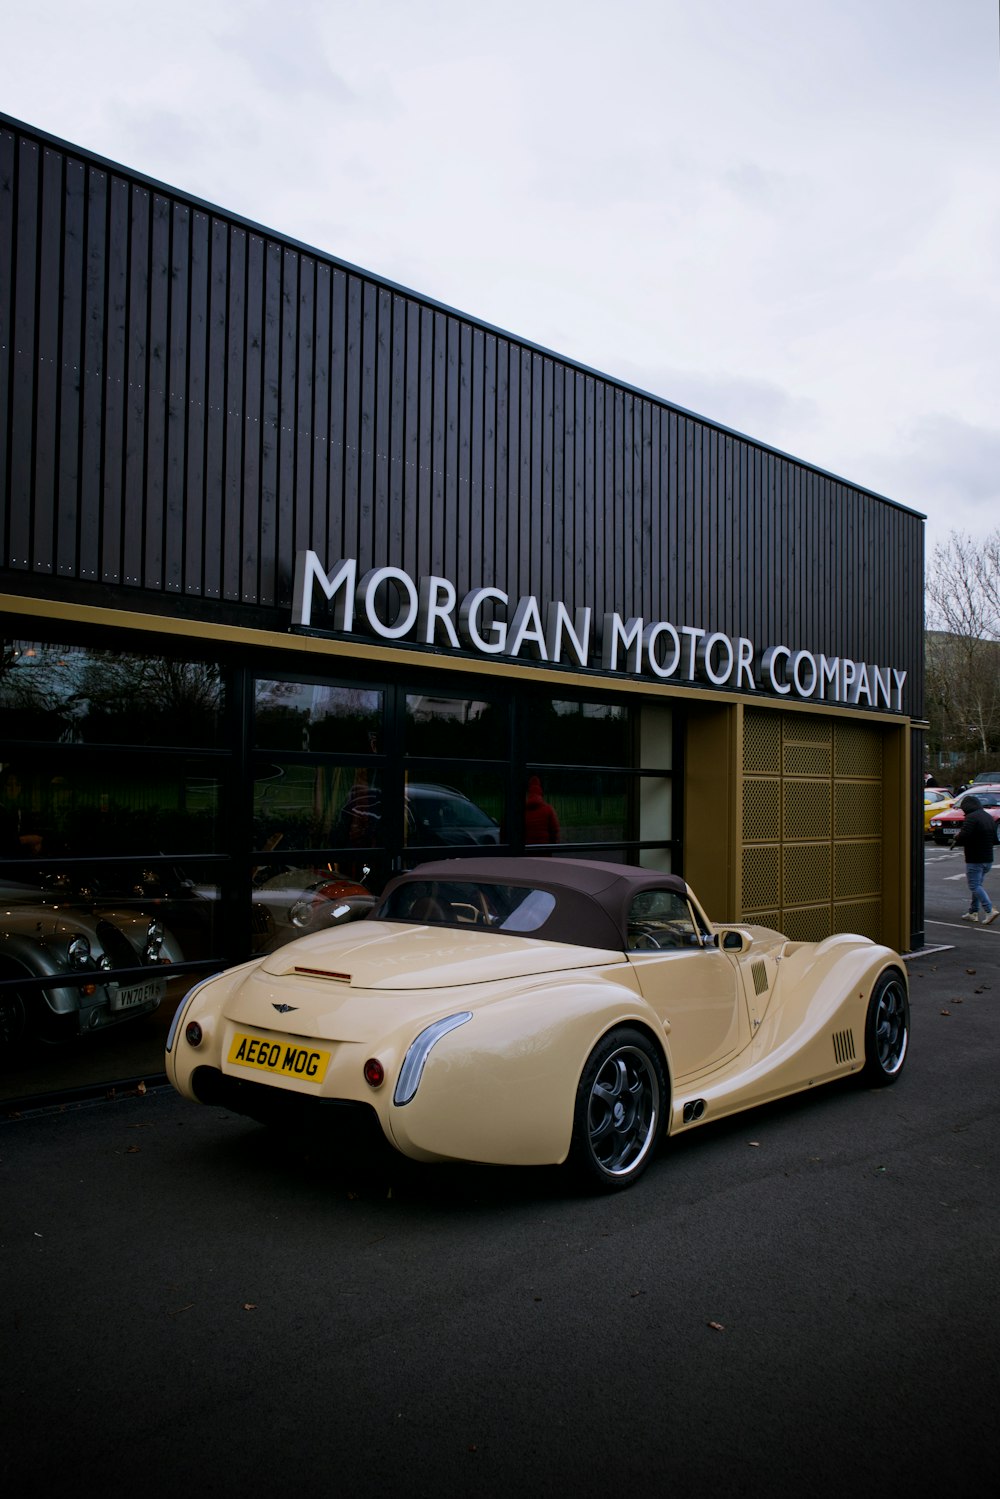 a car parked in front of a morgan motor company